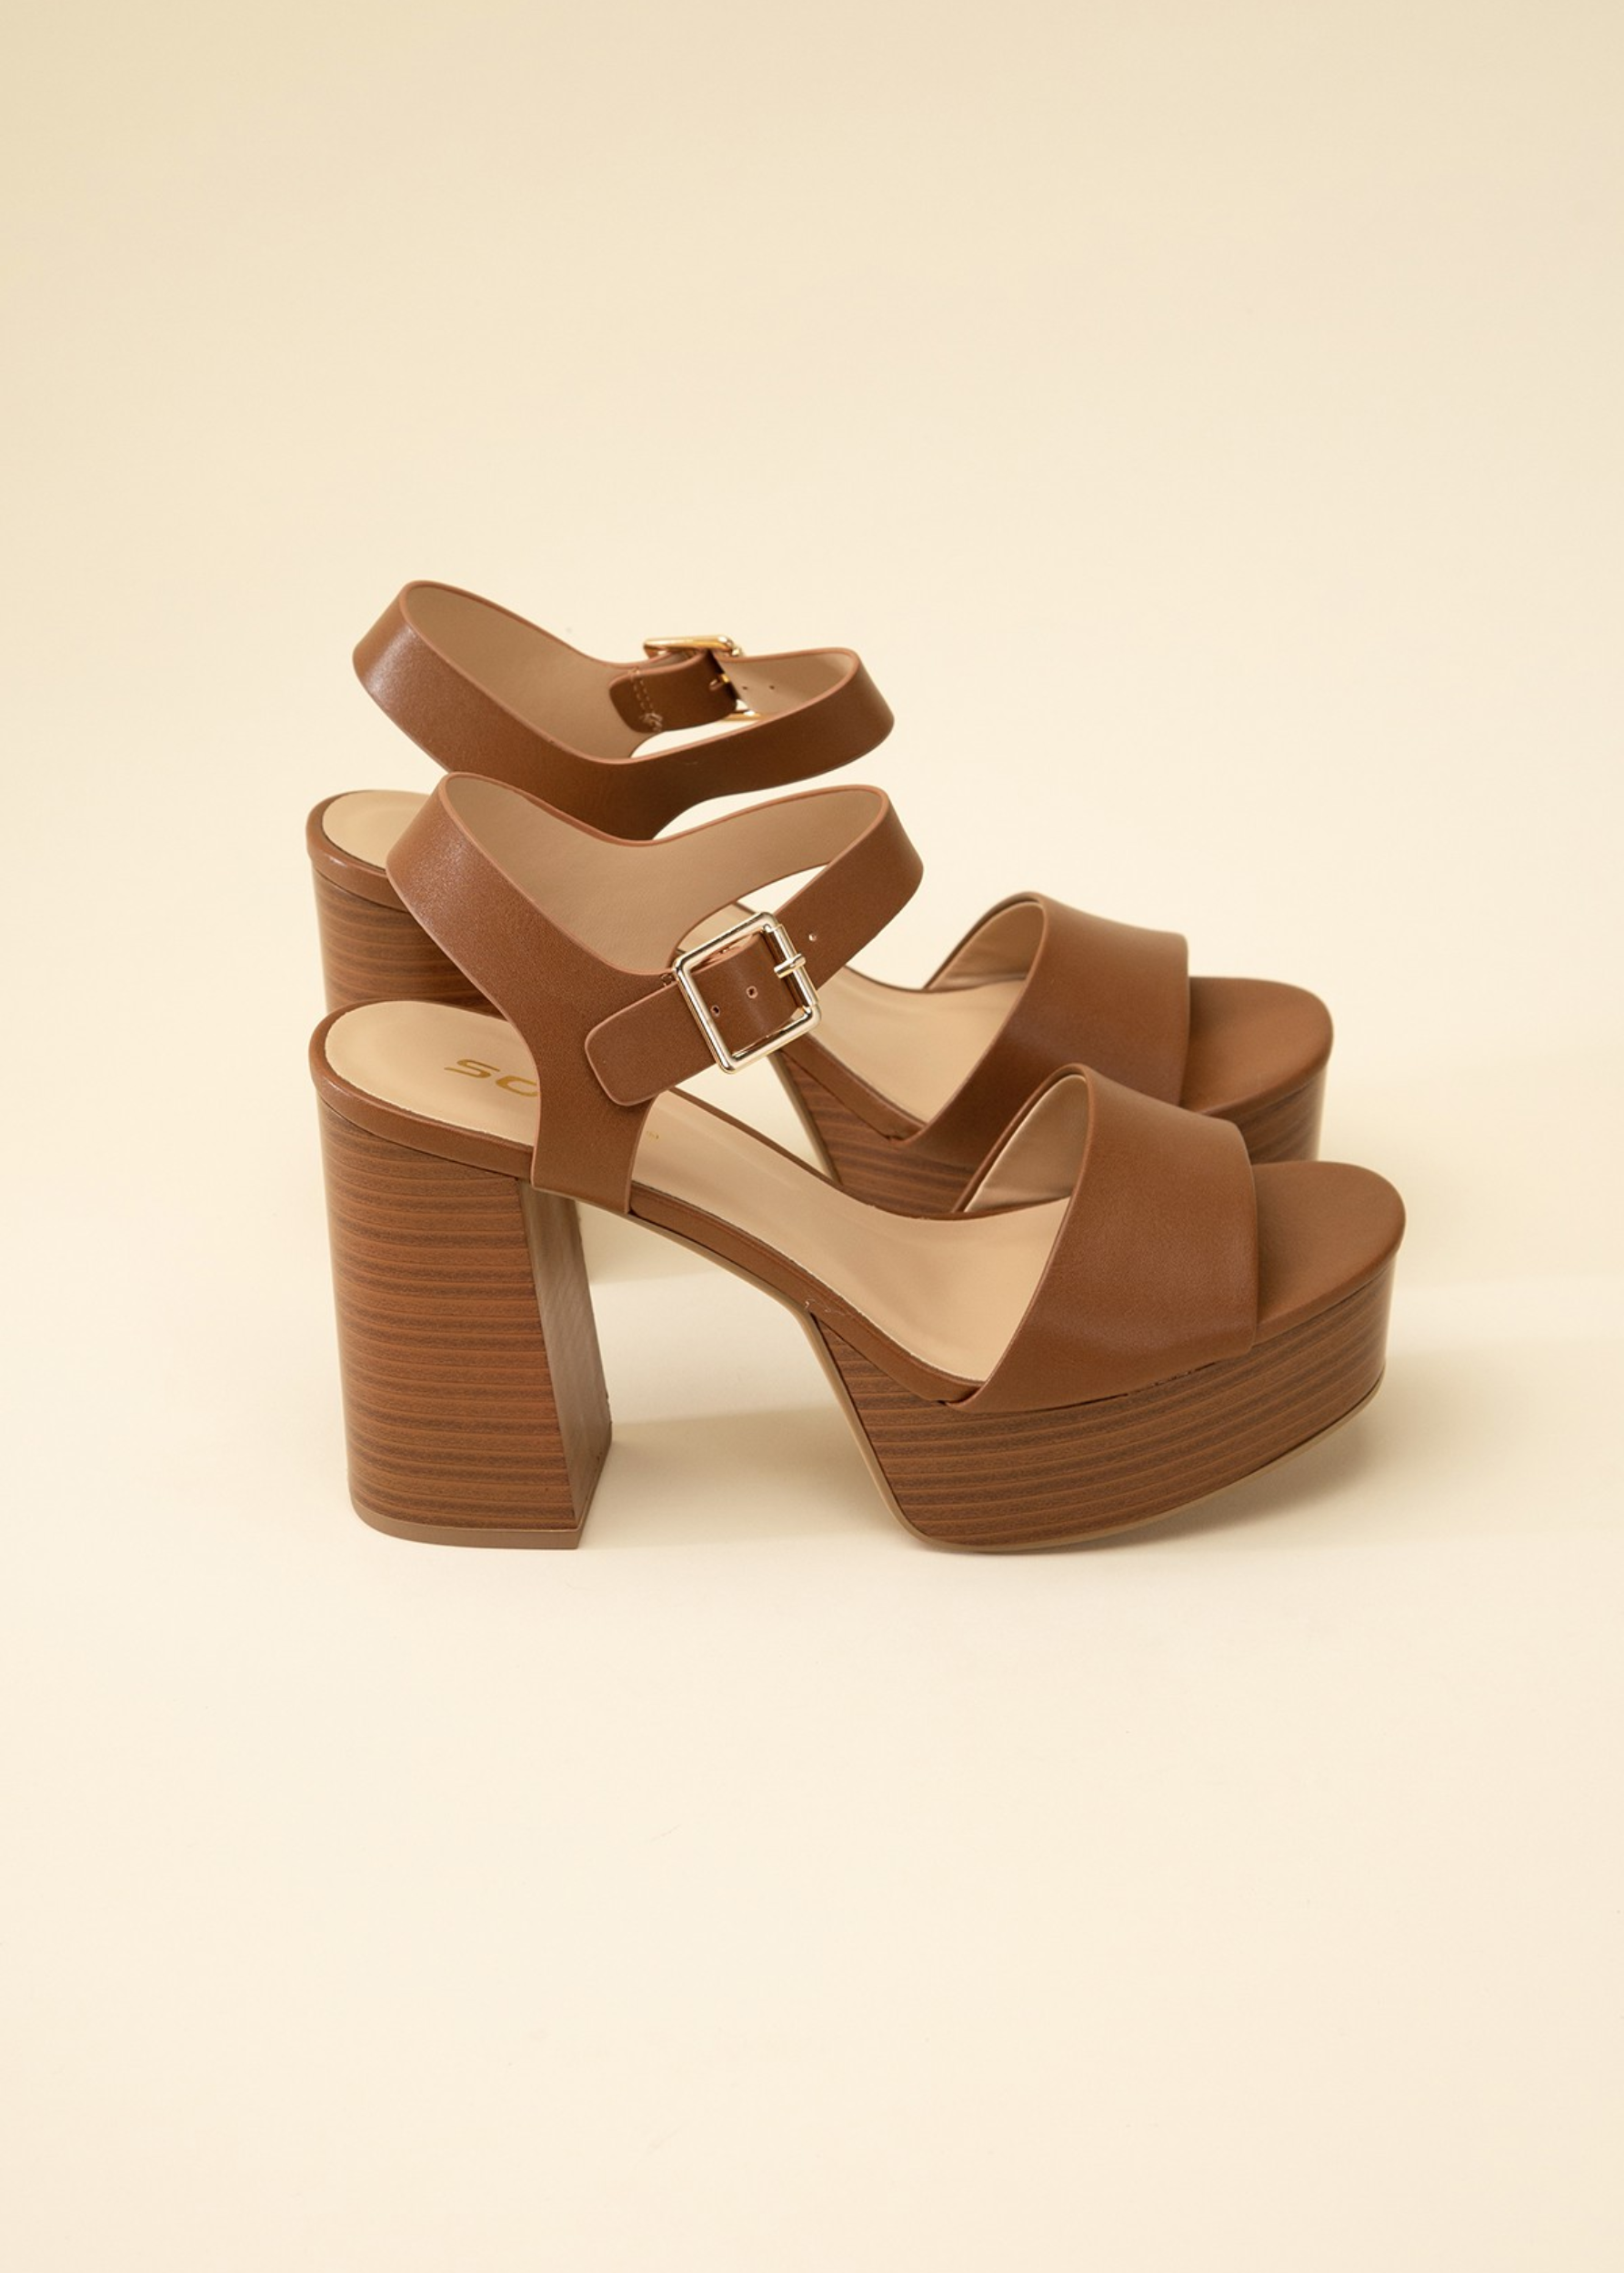 Options-S Ankle Strap Heels